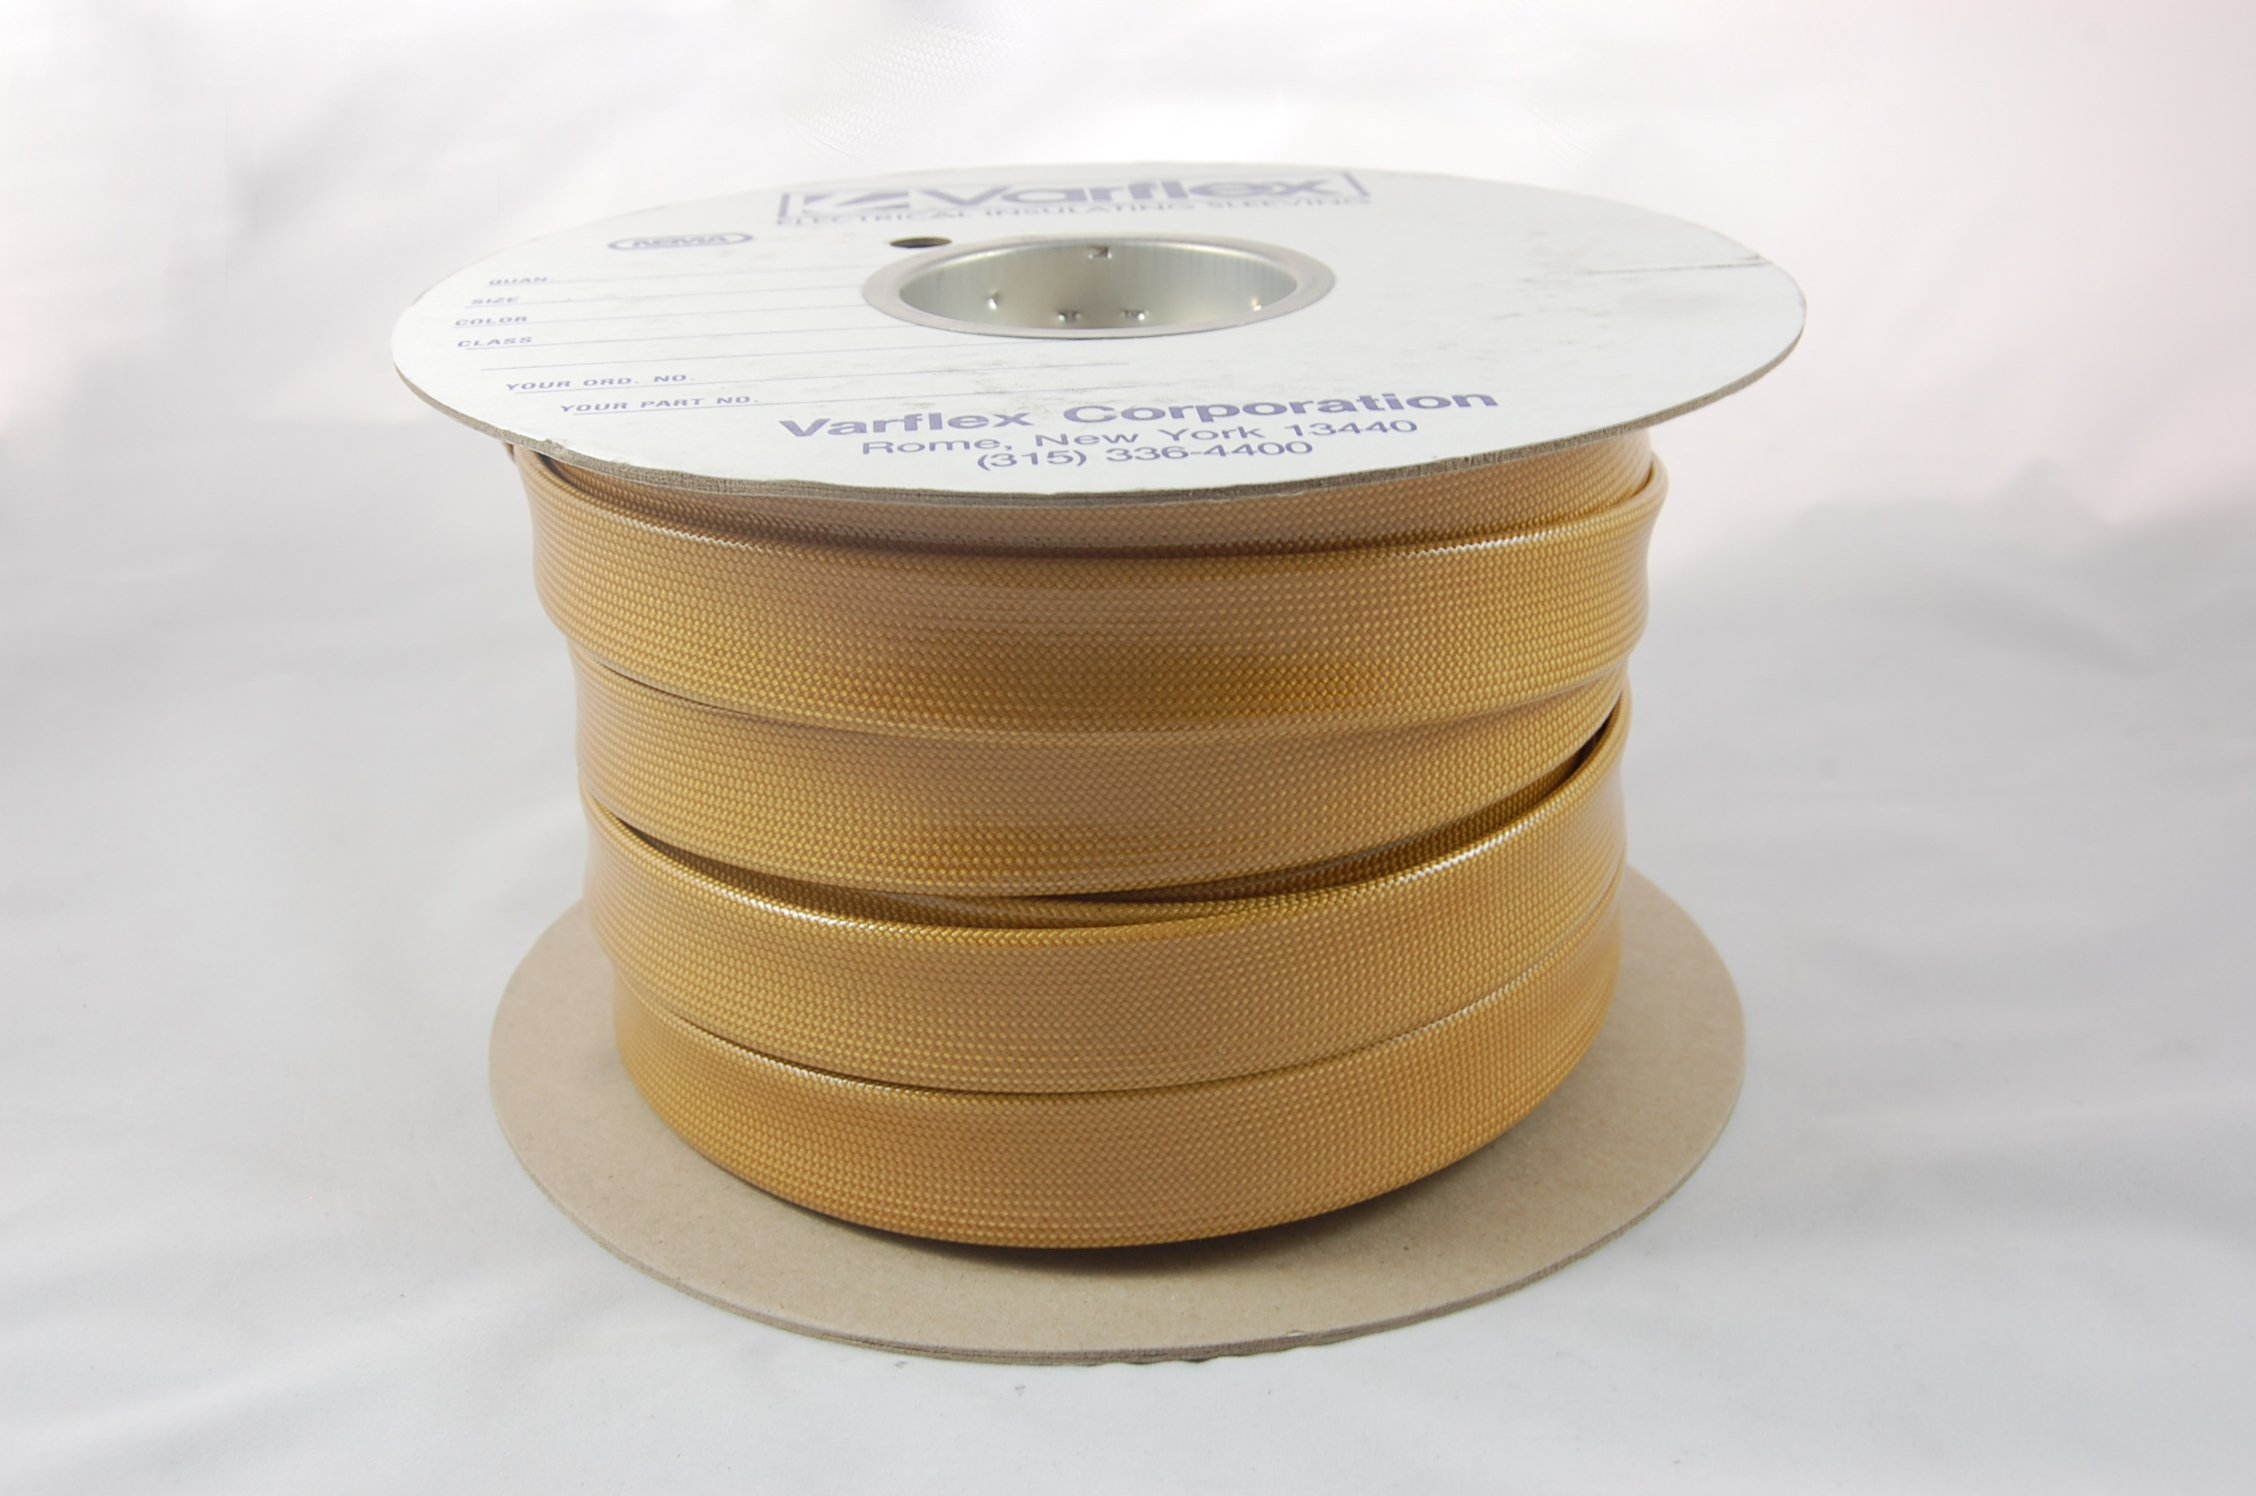 #14 AWG Varglas Silicone Resin 500 Grade H-C-1 (2500V) High Temperature Silicone Resin Coated Braided Fiberglass Sleeving 200°C, natural, 500 FT per spool